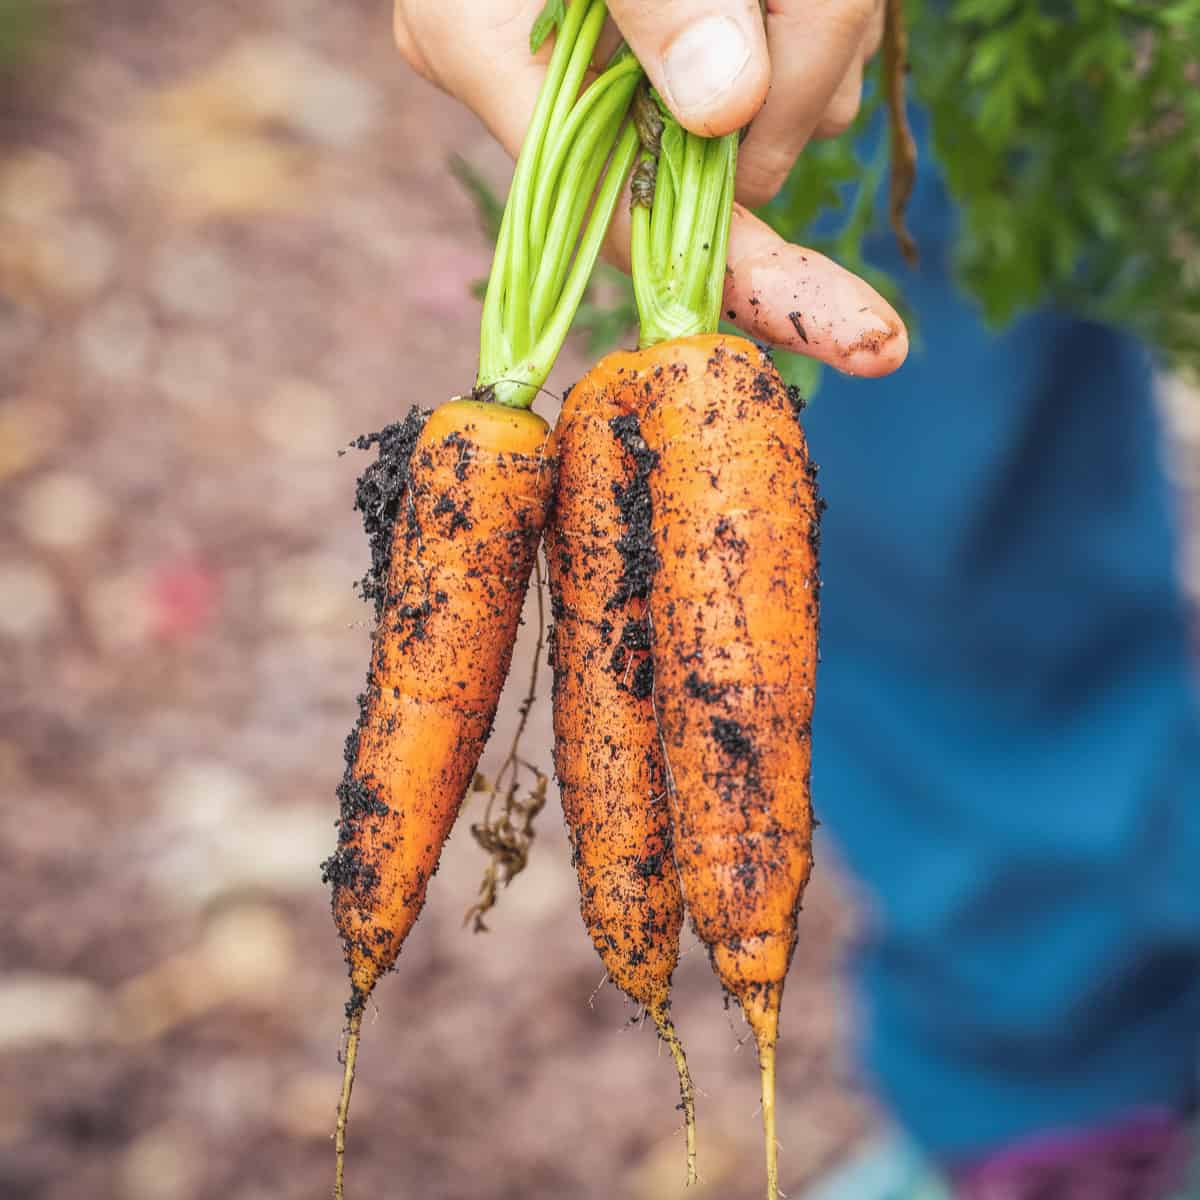 How to plant and grow carrots from seed